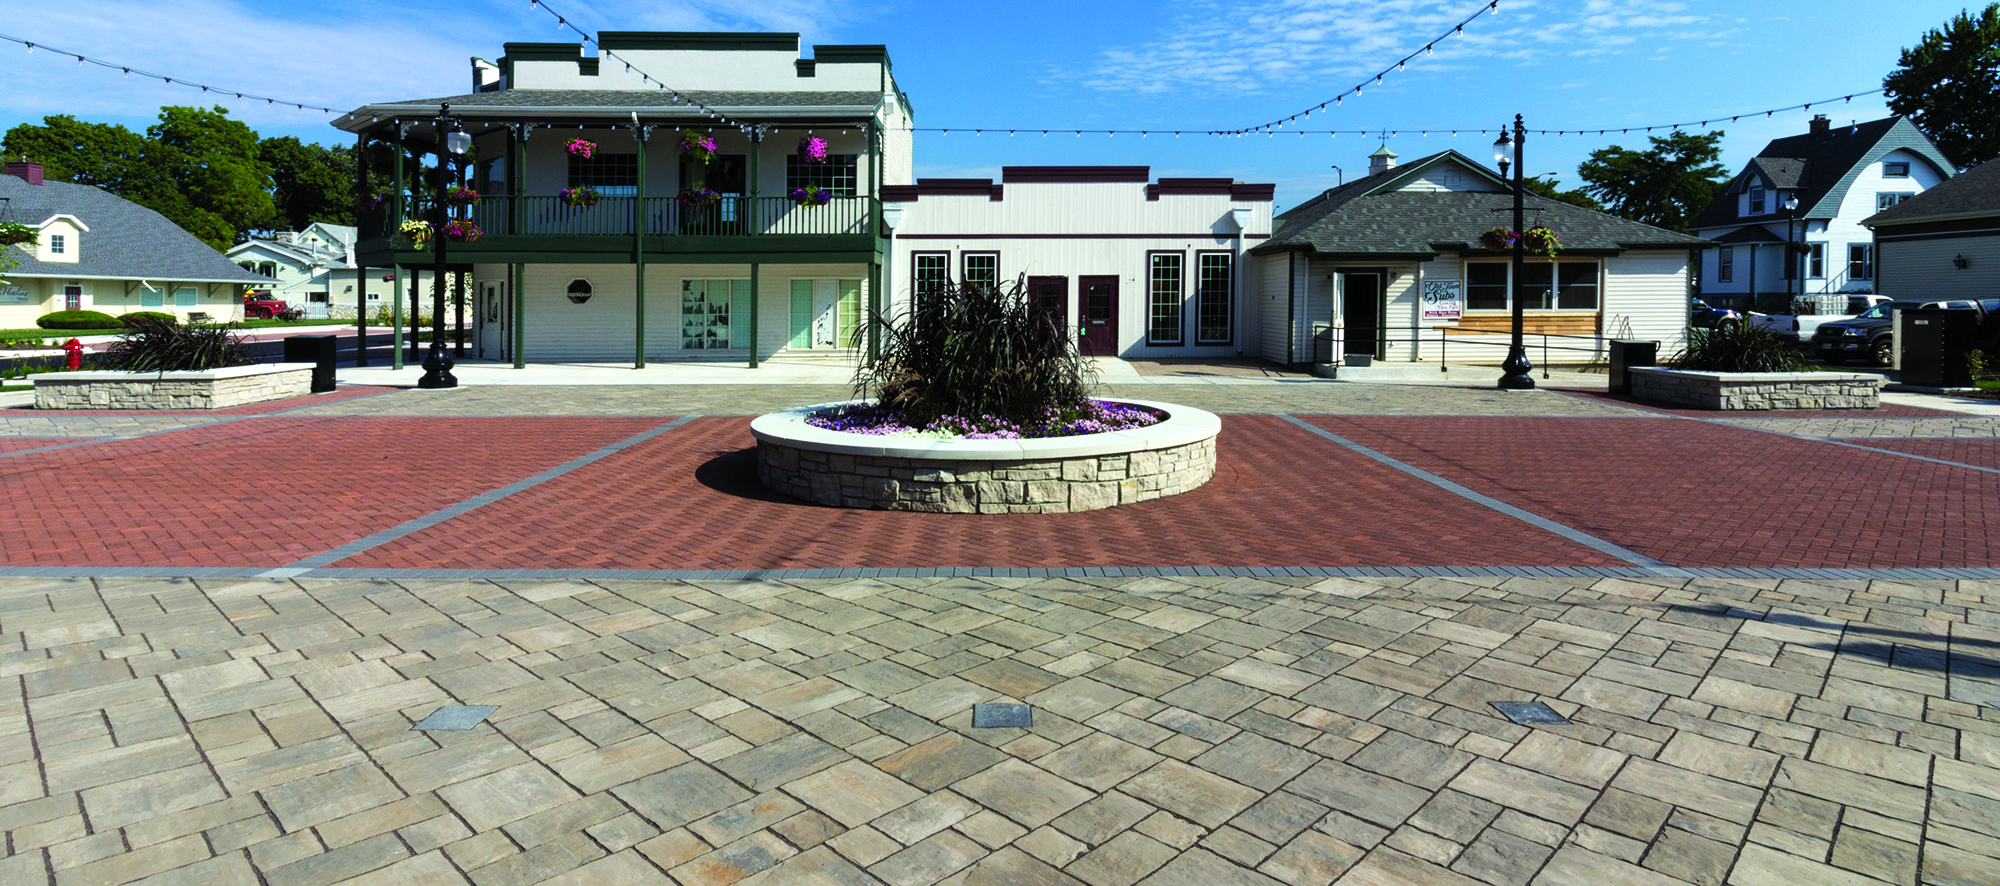 A pedestrian area in front of vintage buildings features contrasting colors and sizes of Unilock pavers, a raised garden, and string lights.